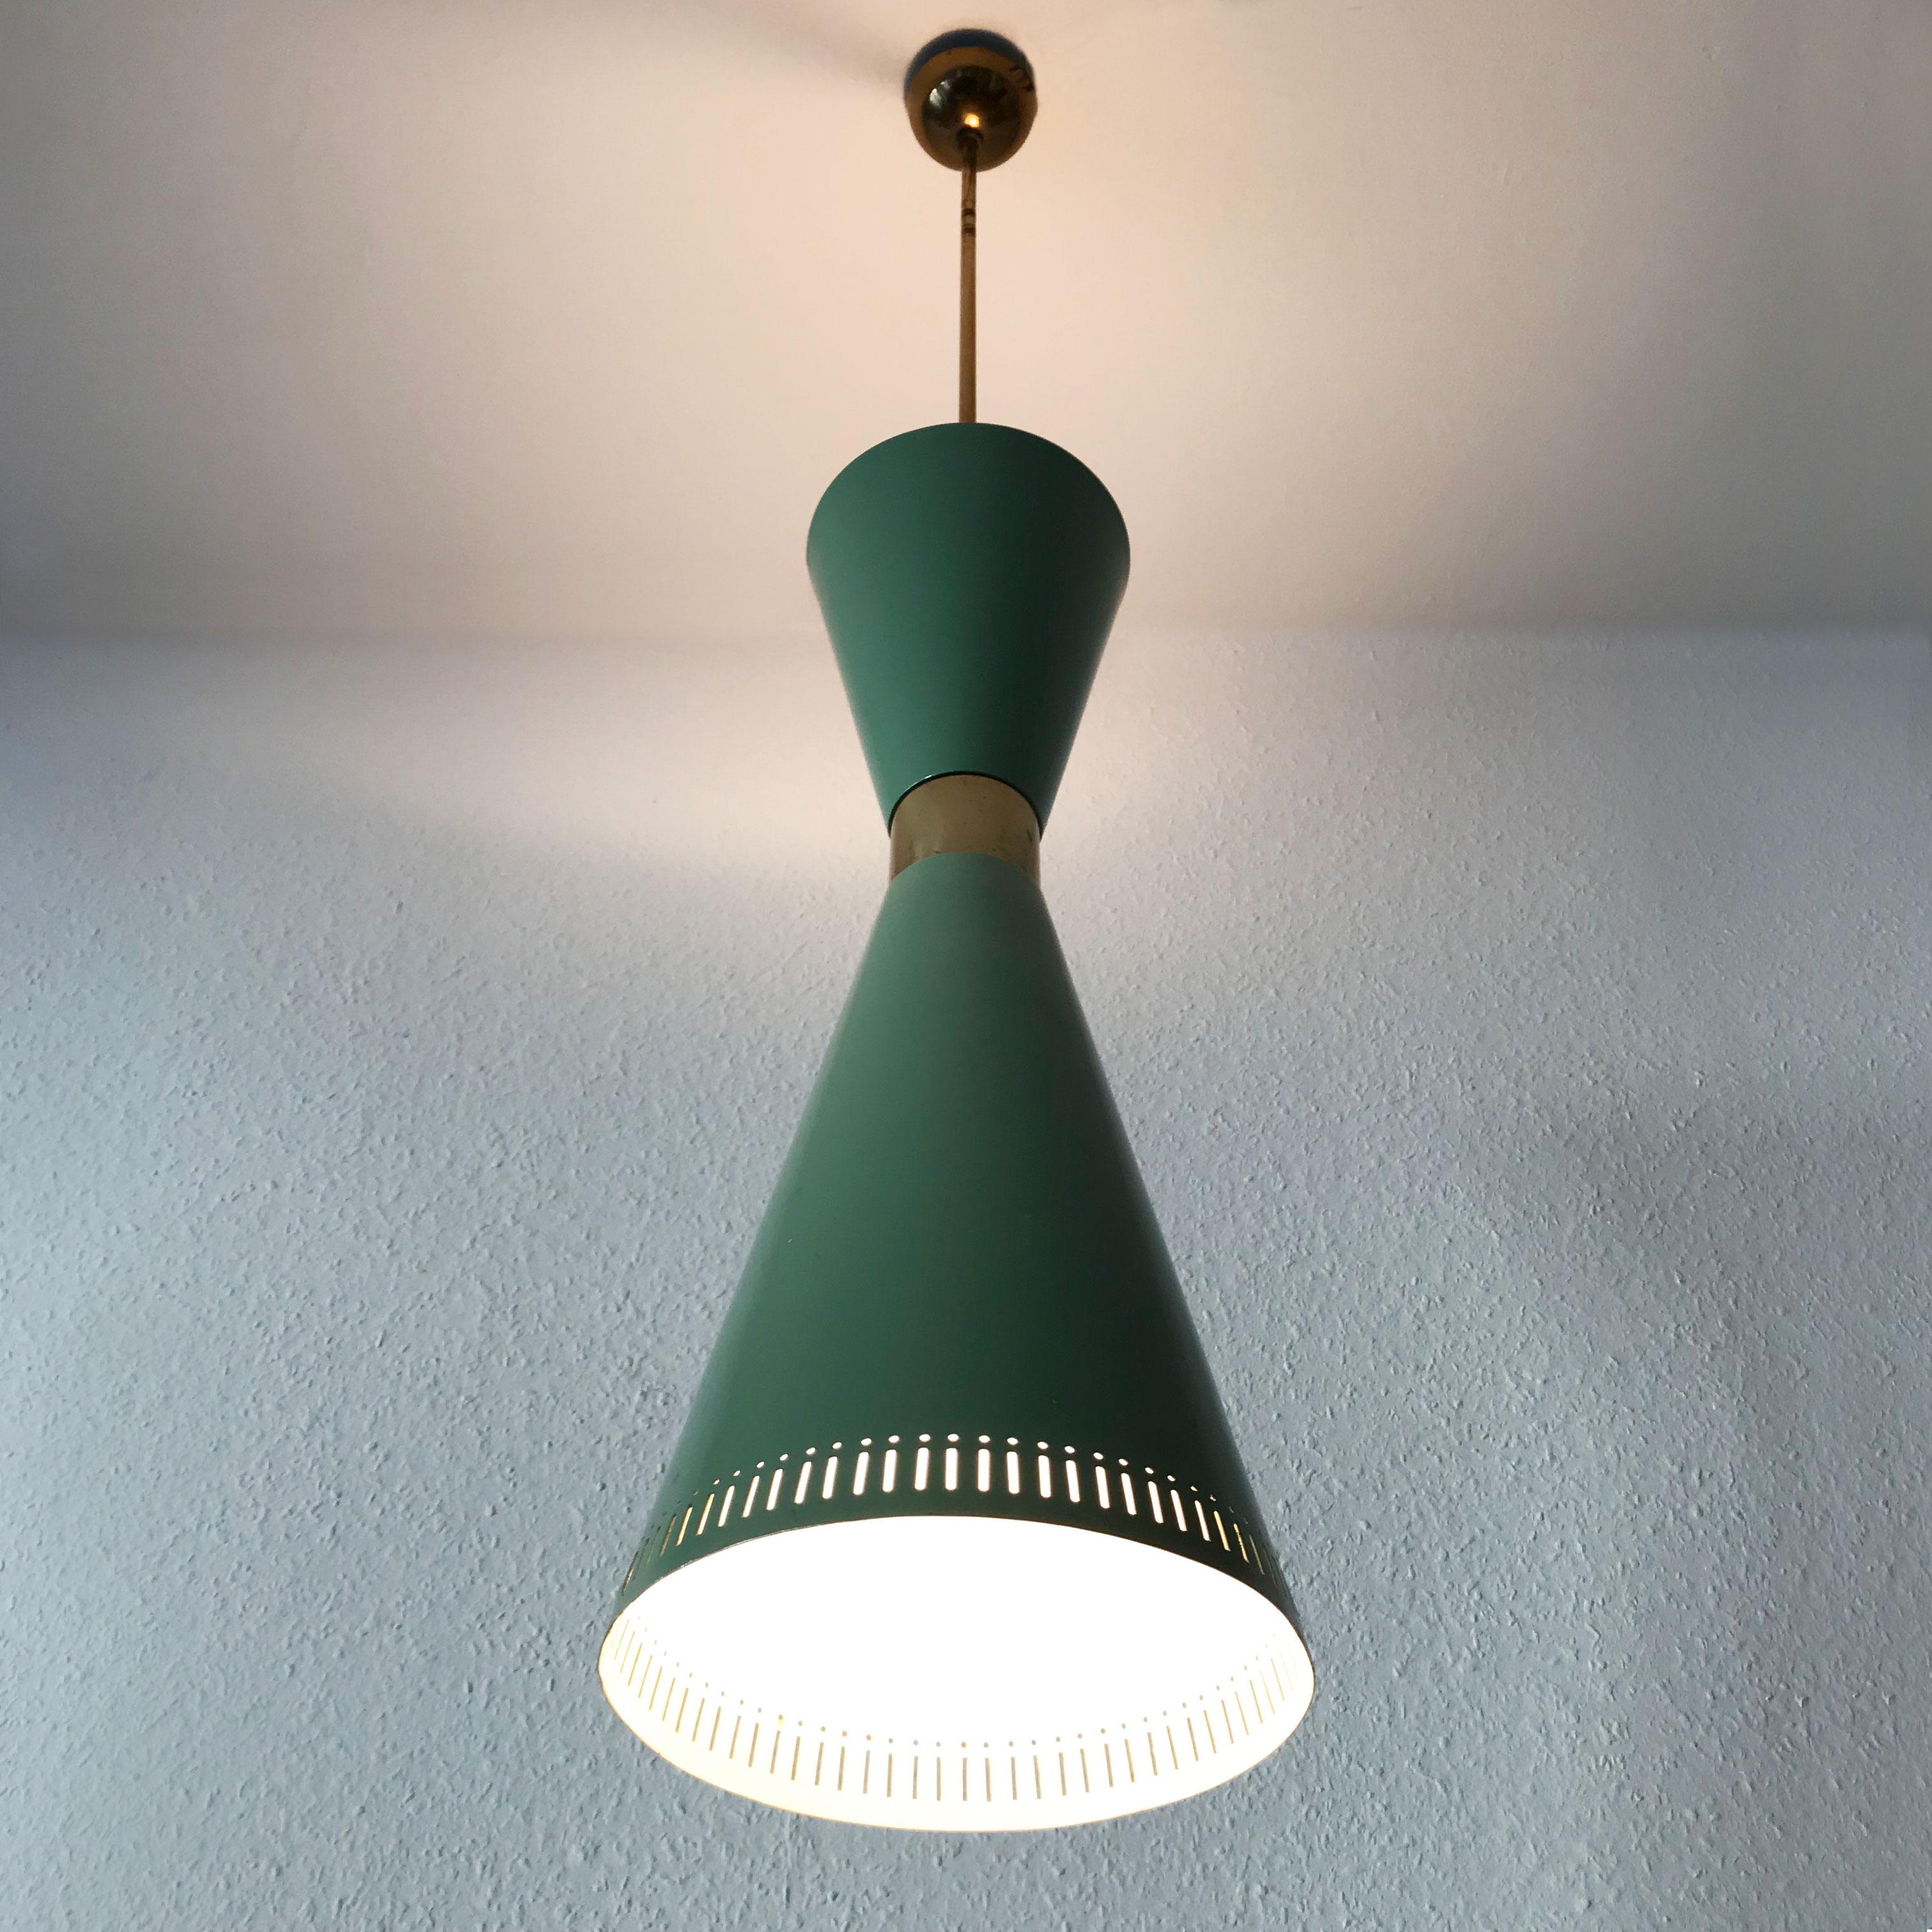 Mid-20th Century Exceptional Mid-Century Modern Large Diabolo Pendant Lamp by BAG Turgi, 1950s